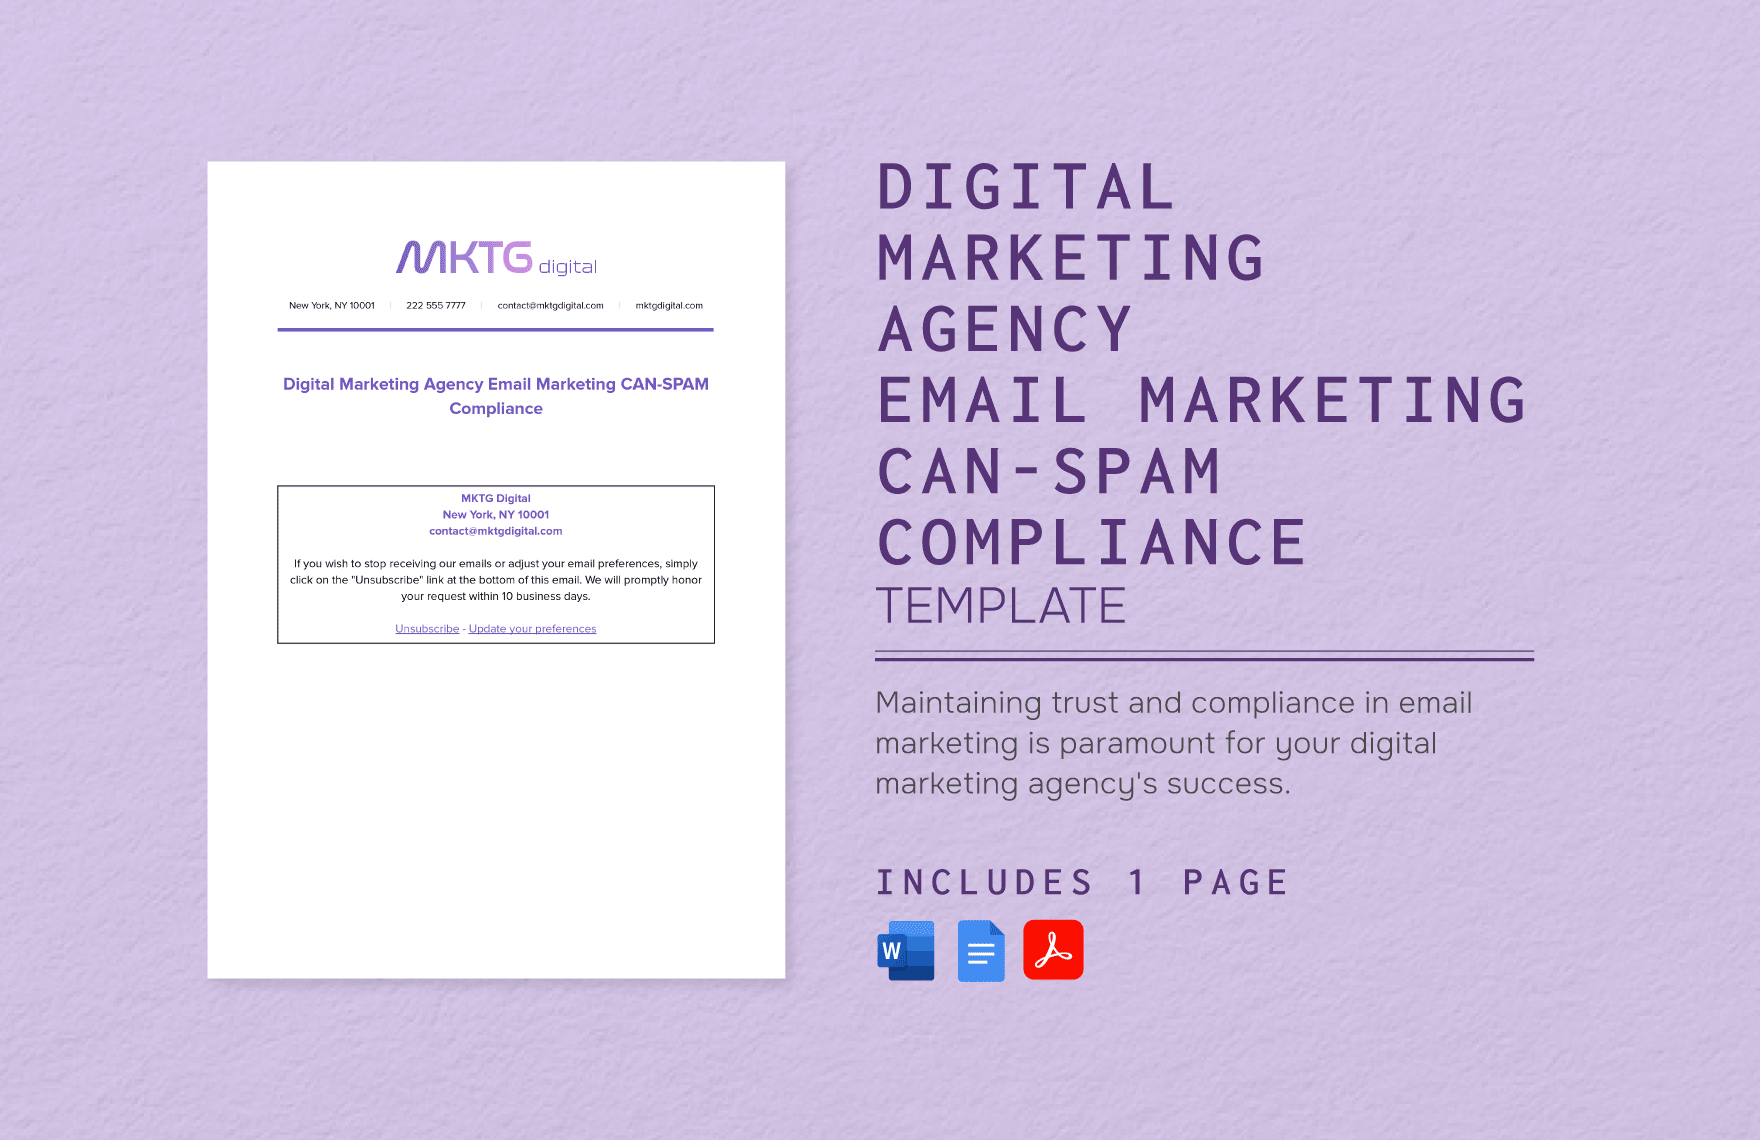 Digital Marketing Agency Email Marketing CAN-SPAM Compliance Template